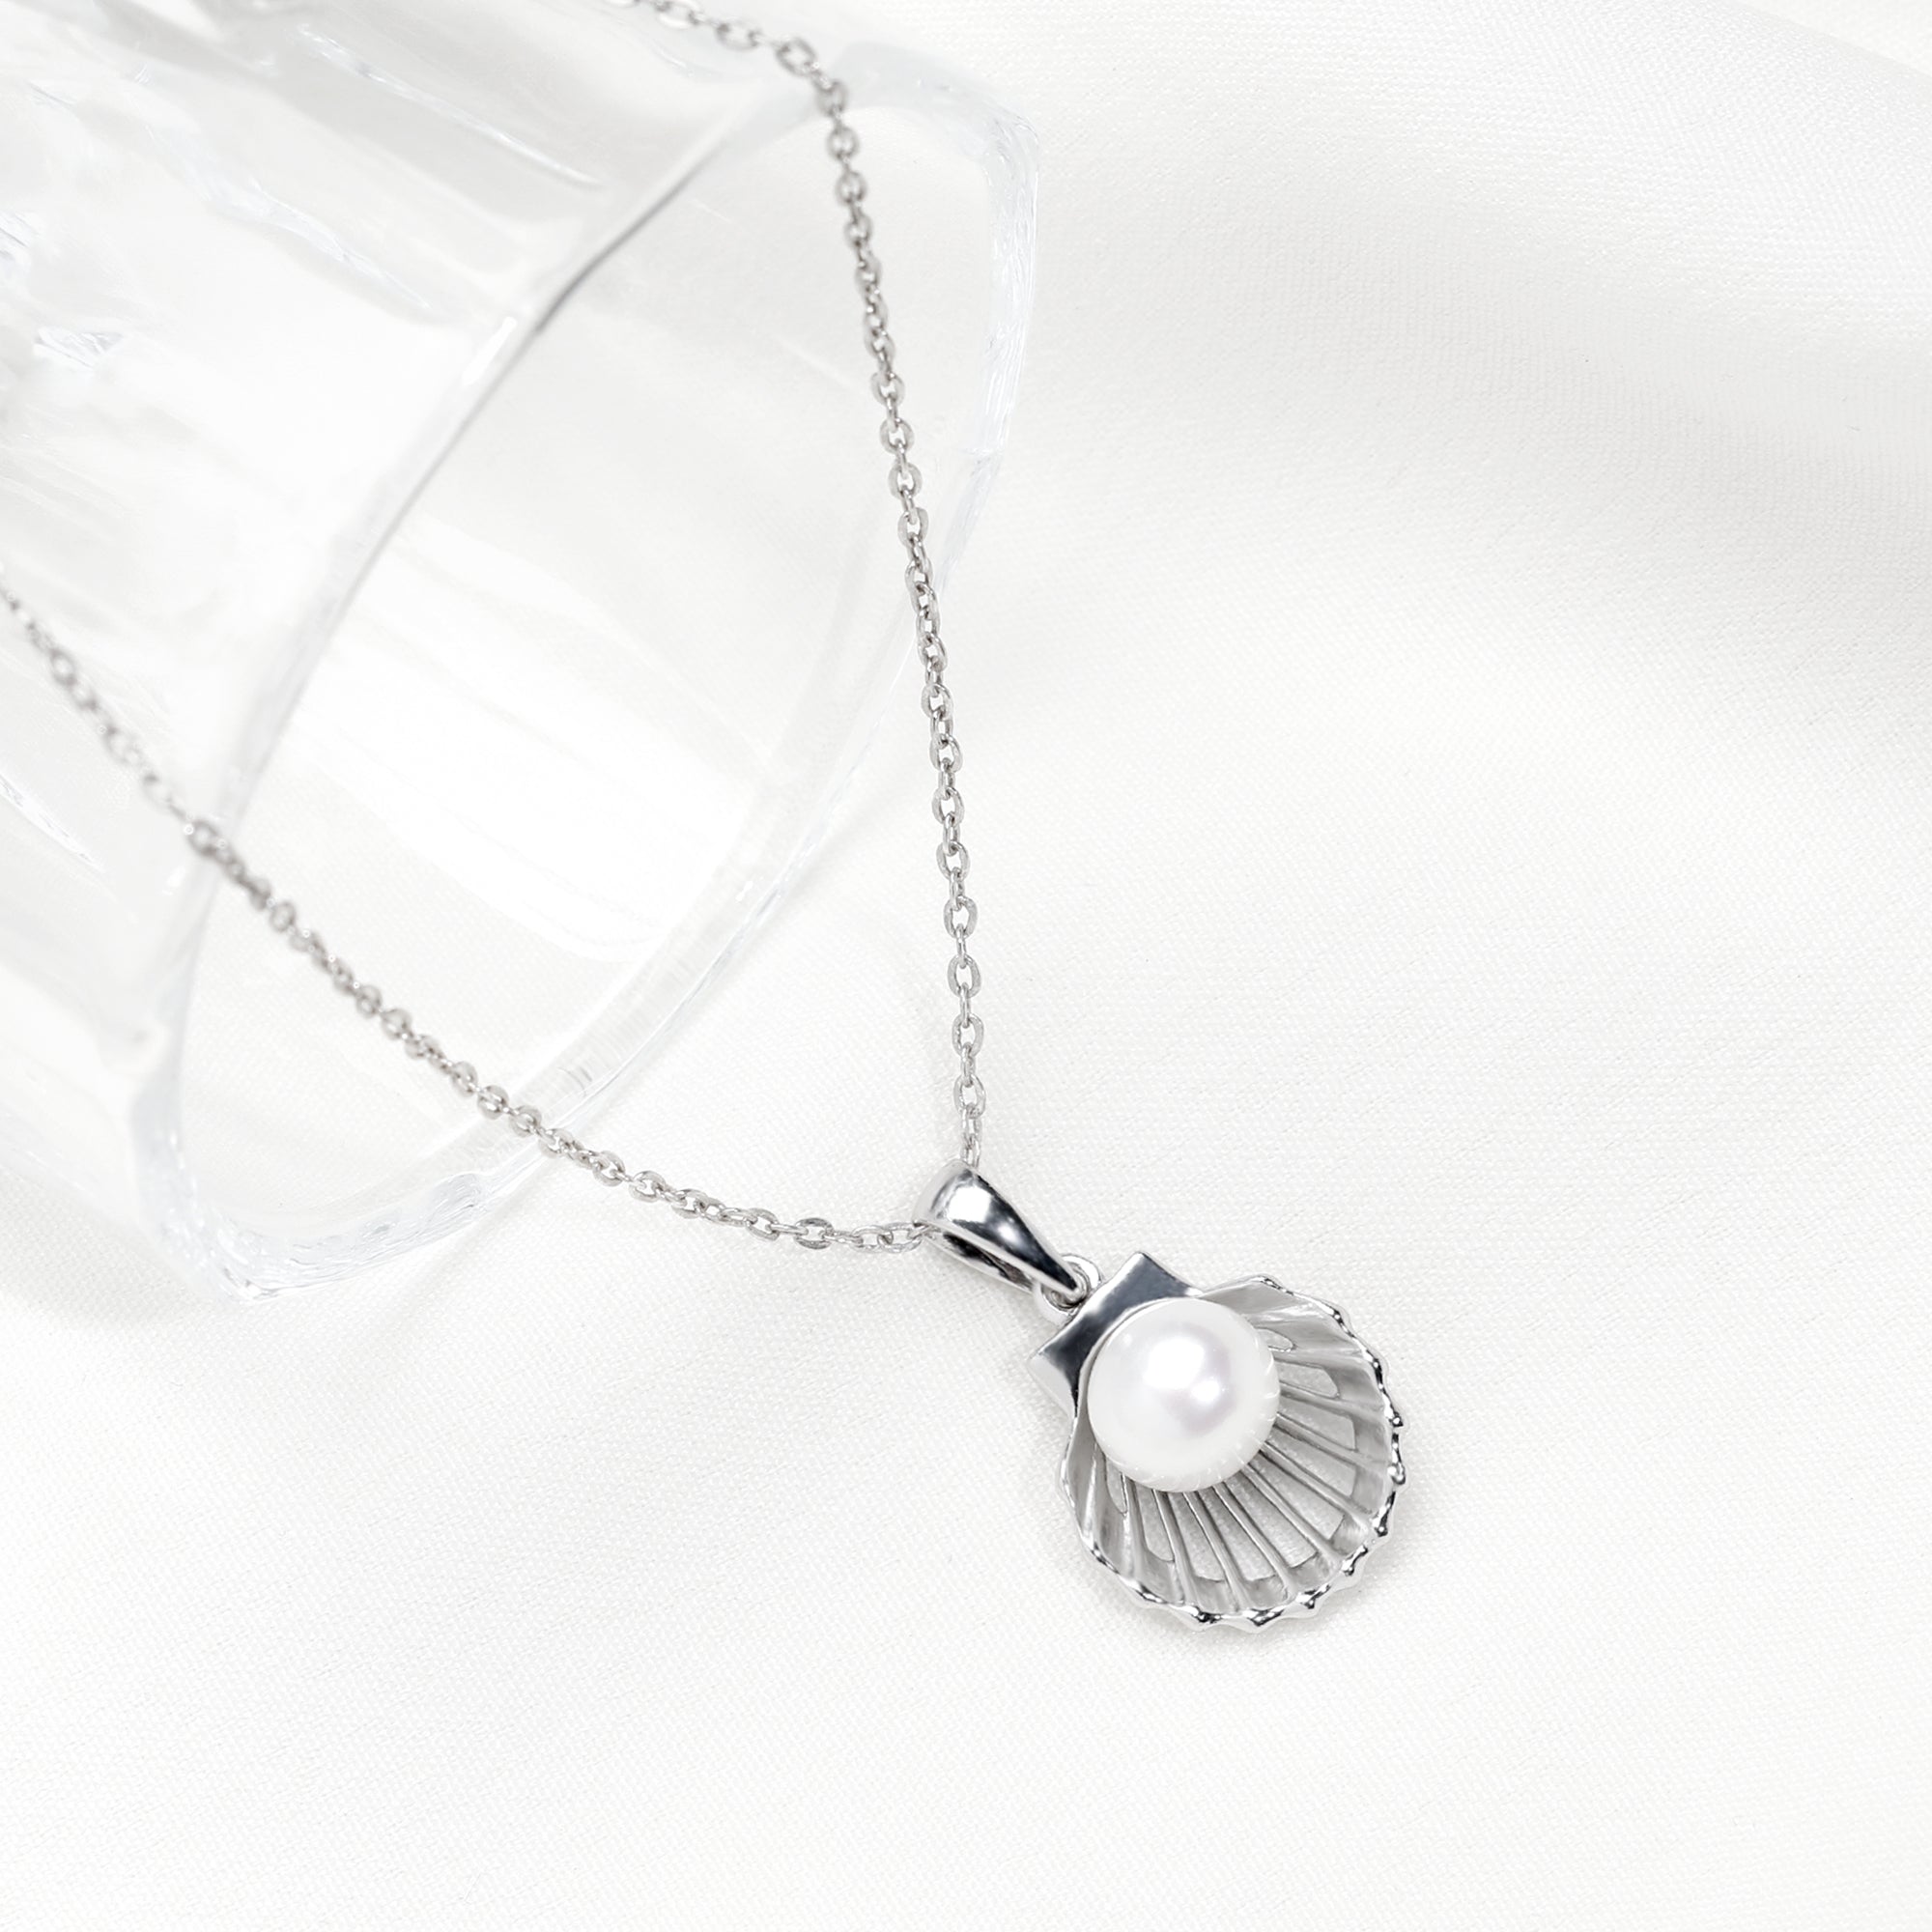 Amazon.com: Sea Scallop Fan Shell Charm Necklace, Symbol of the Camino de  Santiago Pilgrimage by Ali C Art, Made in USA Unique Handmade Sterling  Silver Ocean Pendant Jewelry, Gift for Her Women